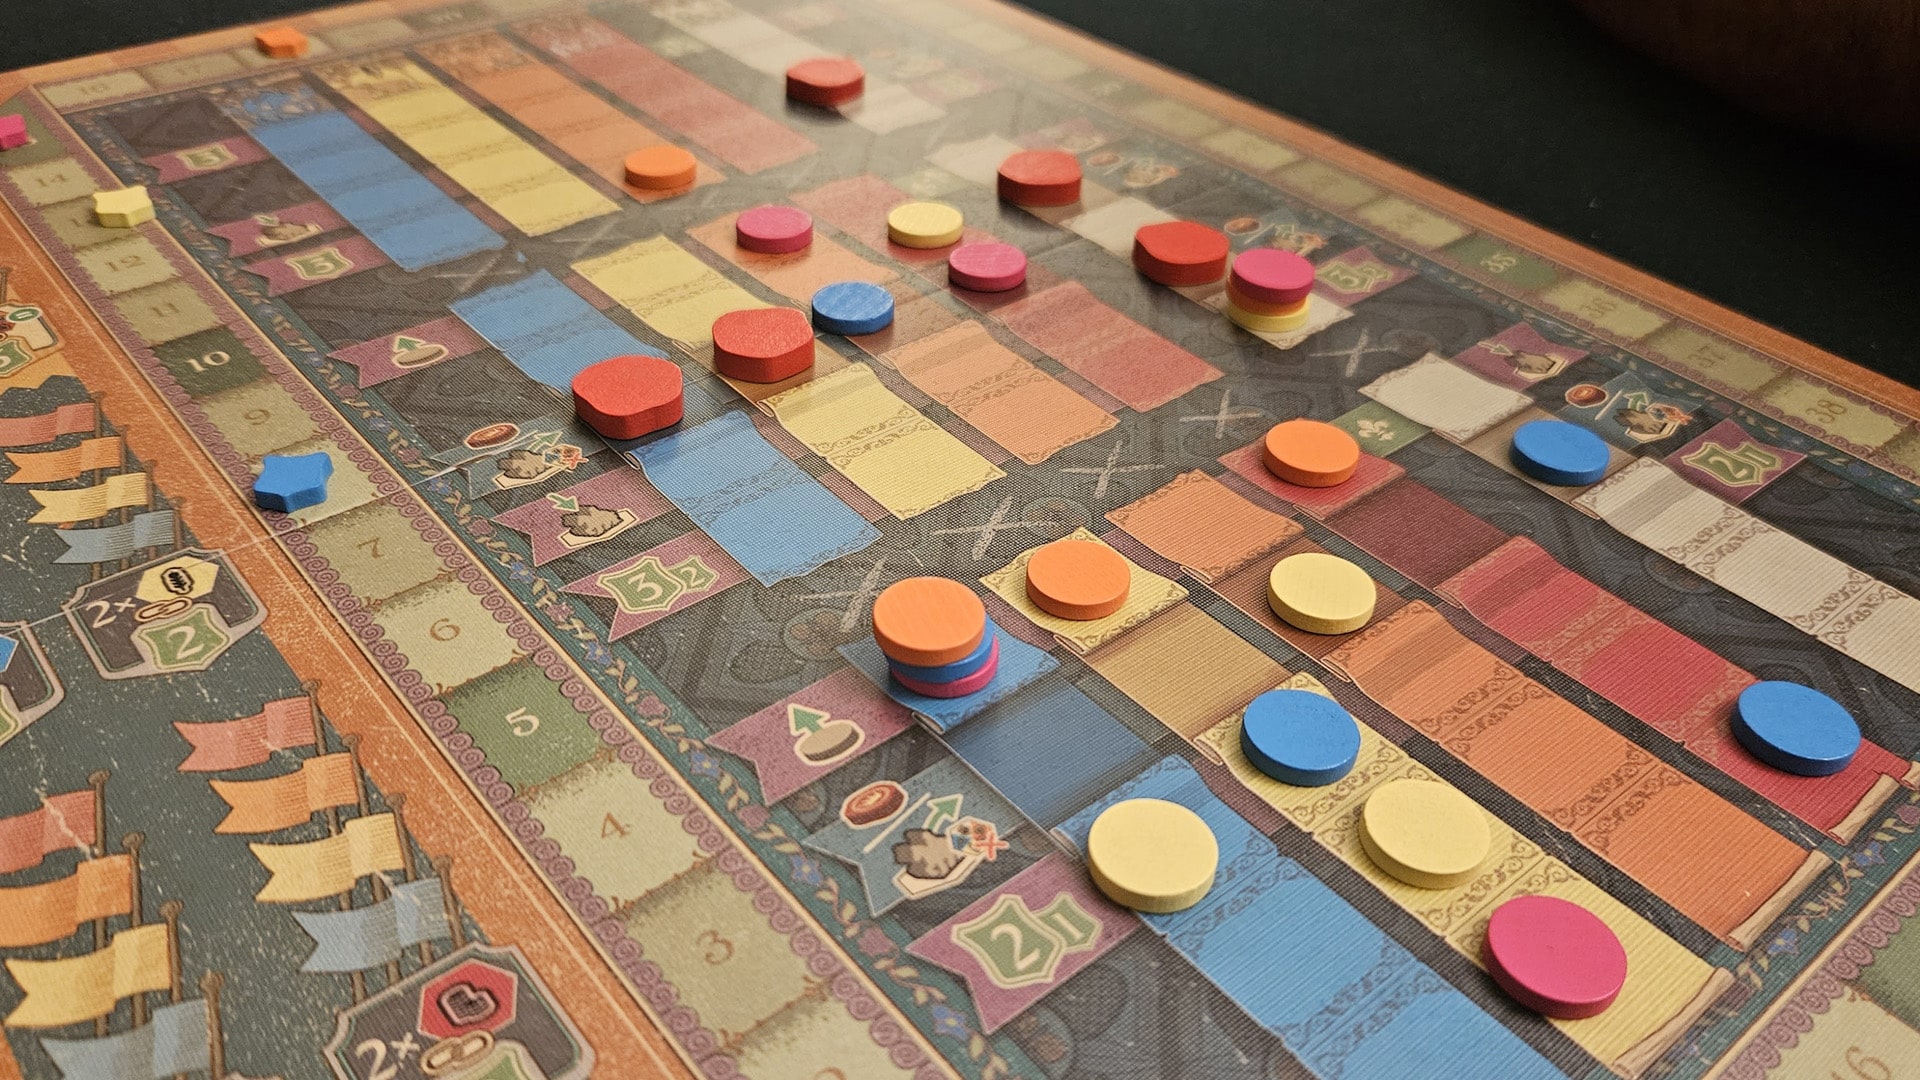 Intricately designed game pieces and board of Cascadero and Cascadito, showcasing the game's unique aesthetic and gameplay elements.